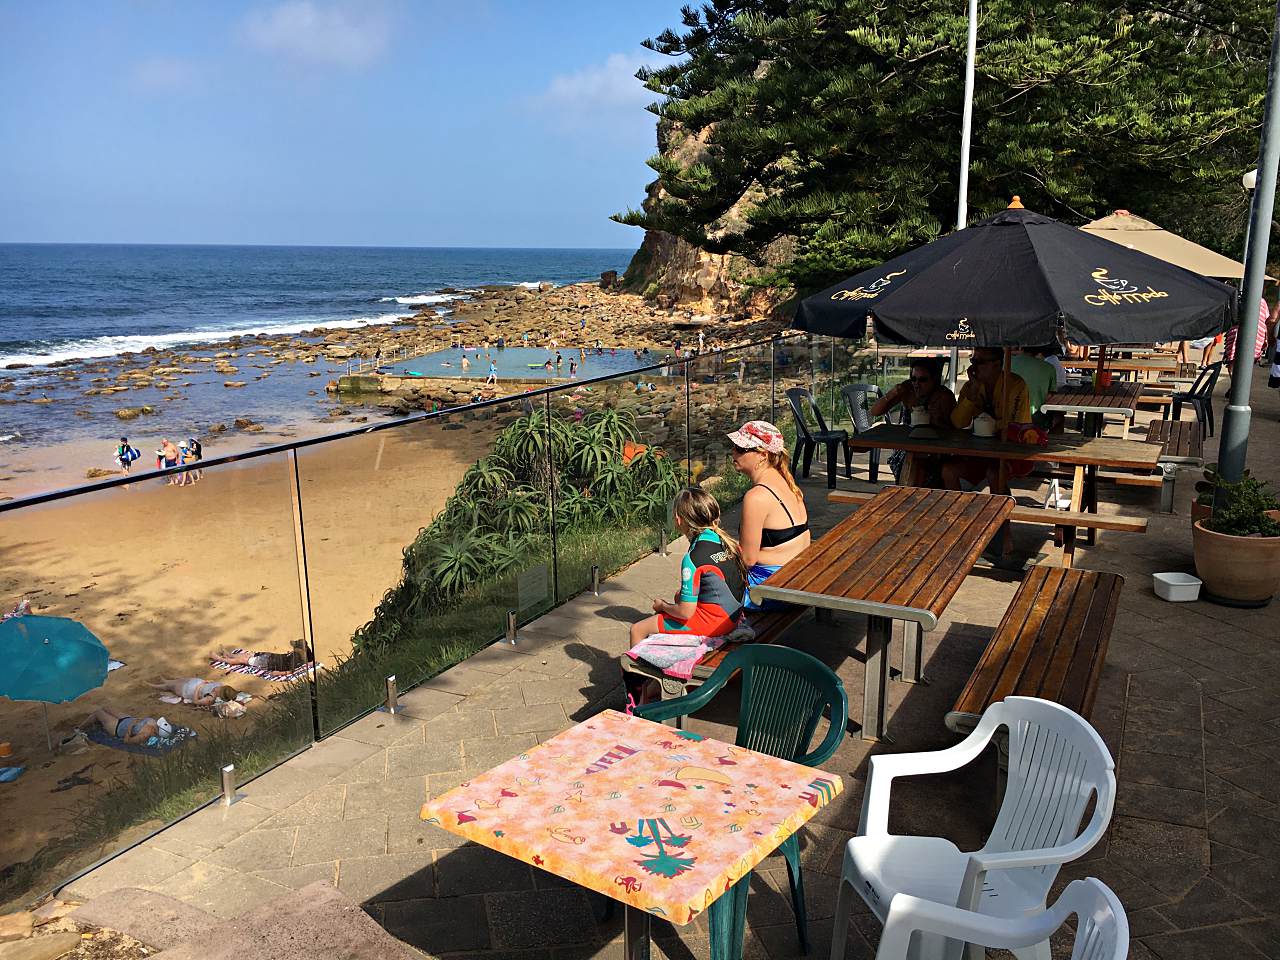 The deck at Barefoot Cafe at Macmasters Beach